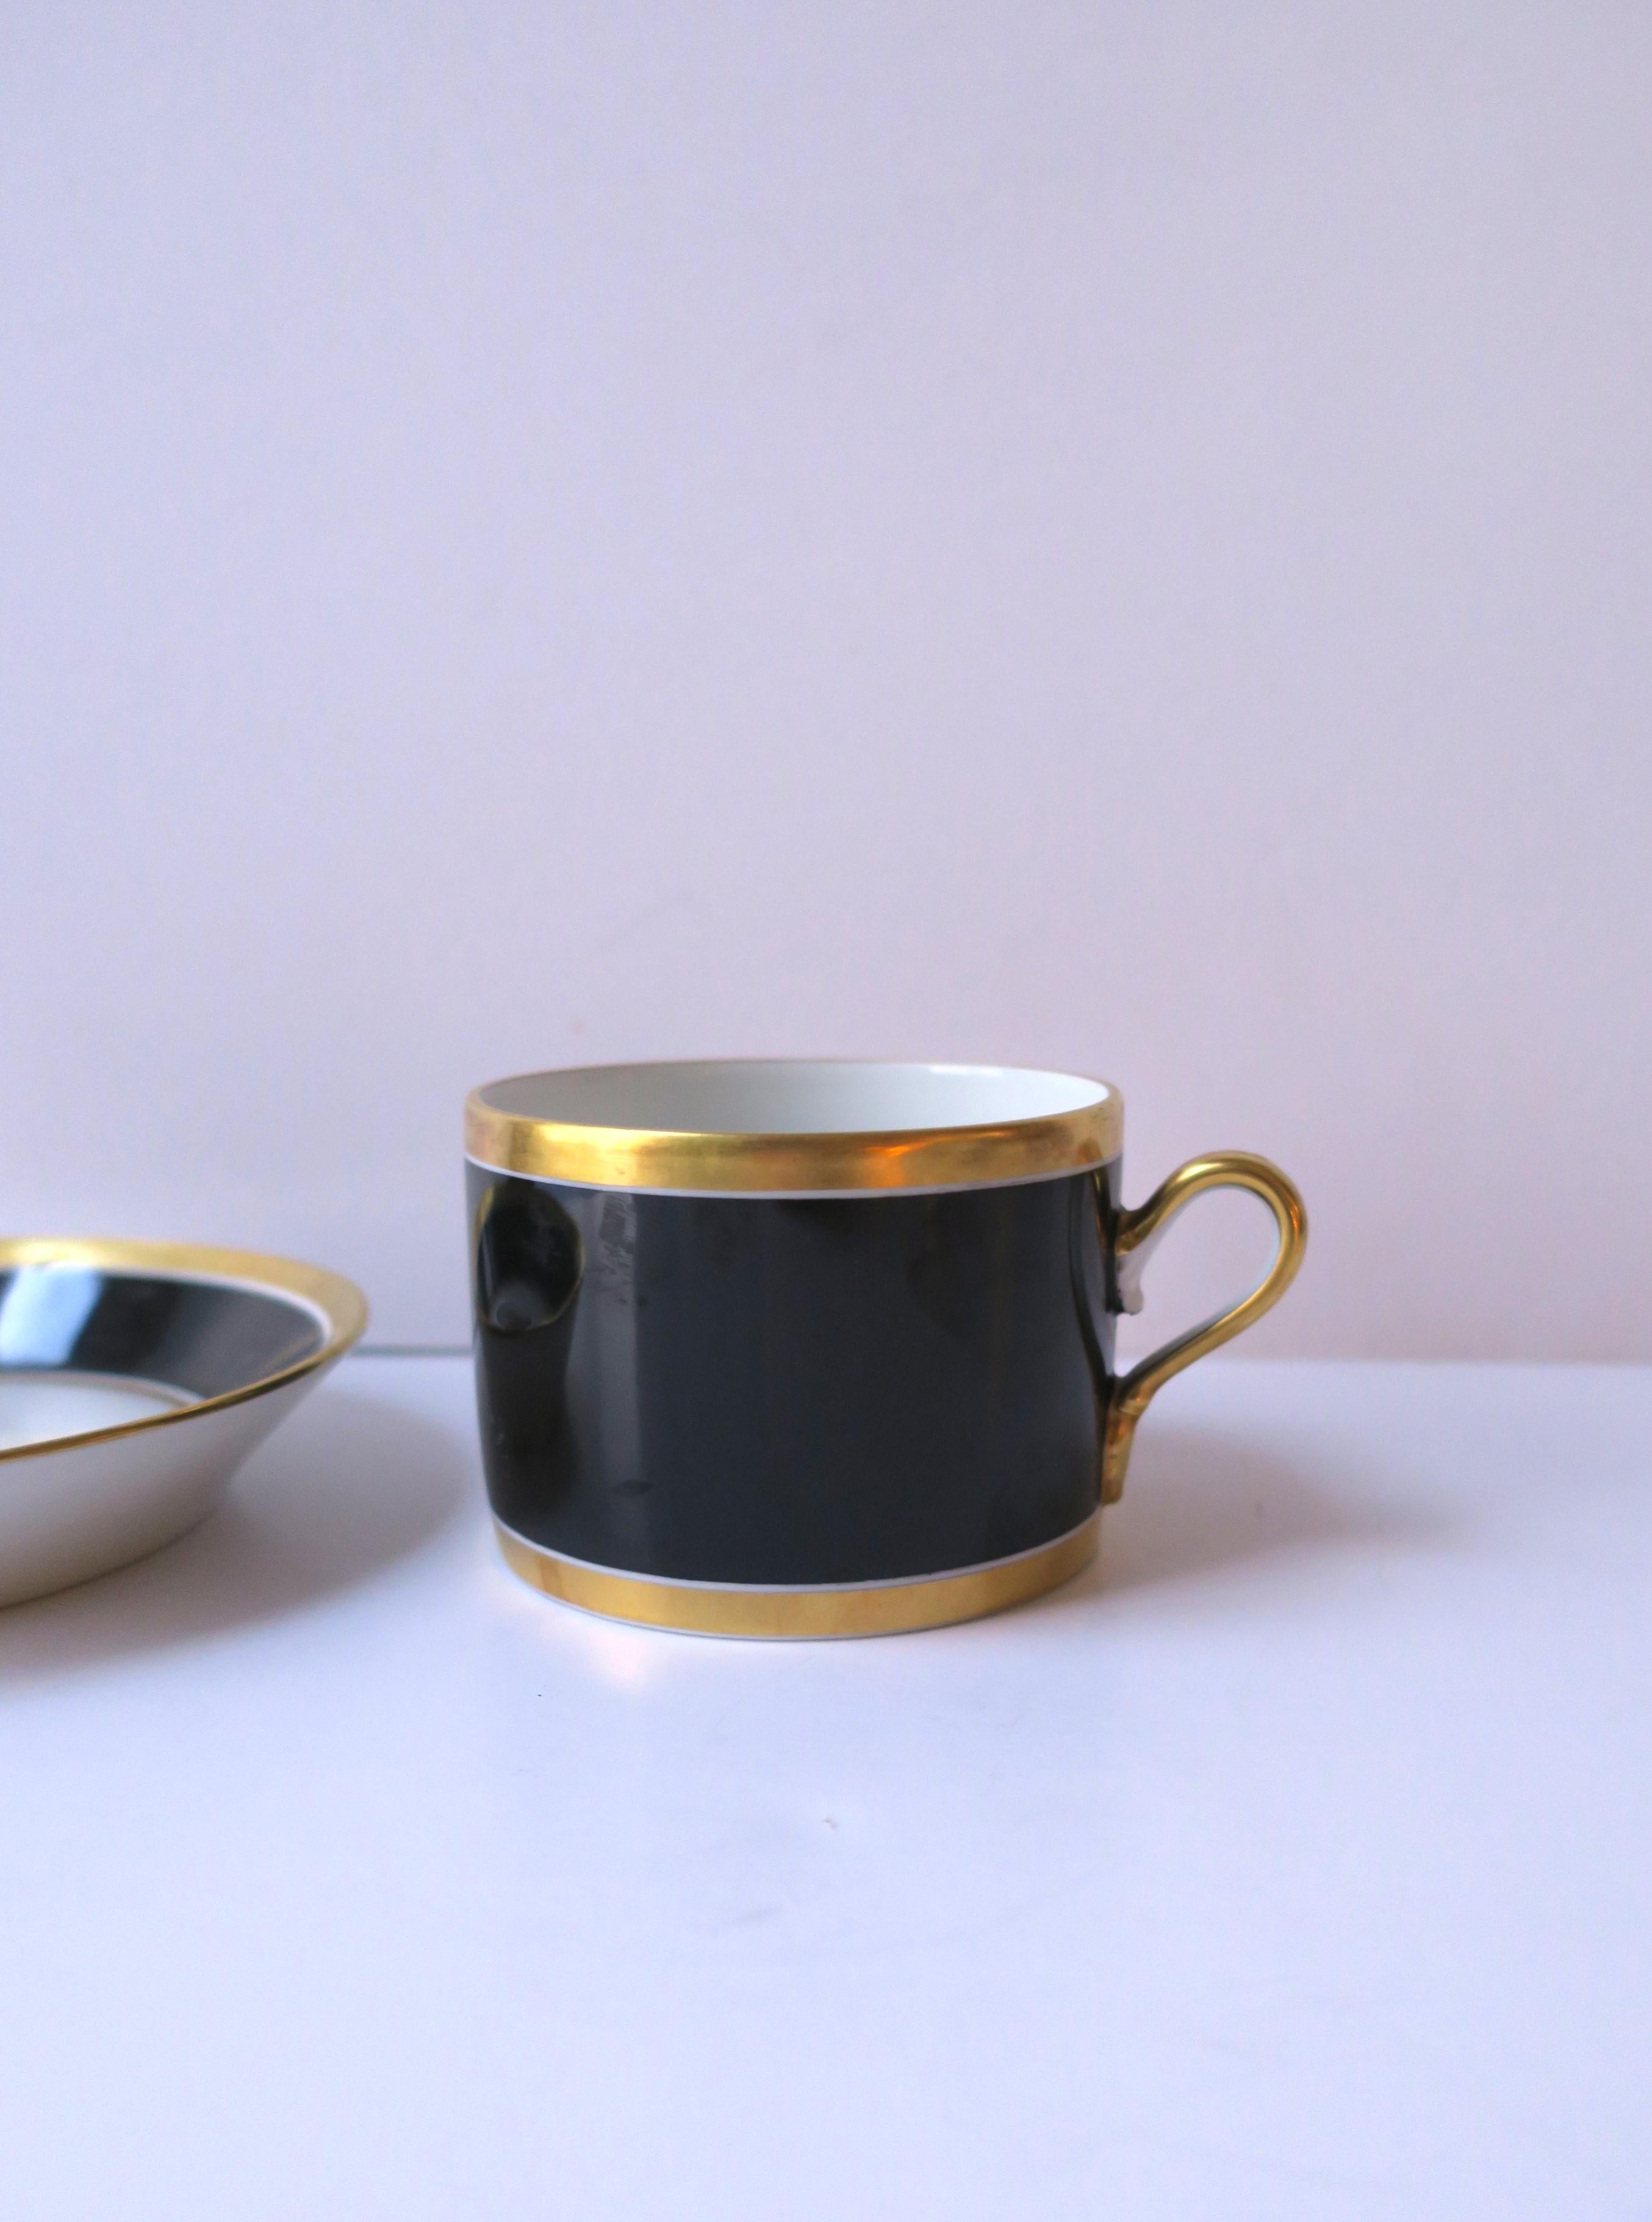 Glazed Richard Ginori Vintage Black Gold Porcelain Coffee or Tea Cup and Saucer For Sale